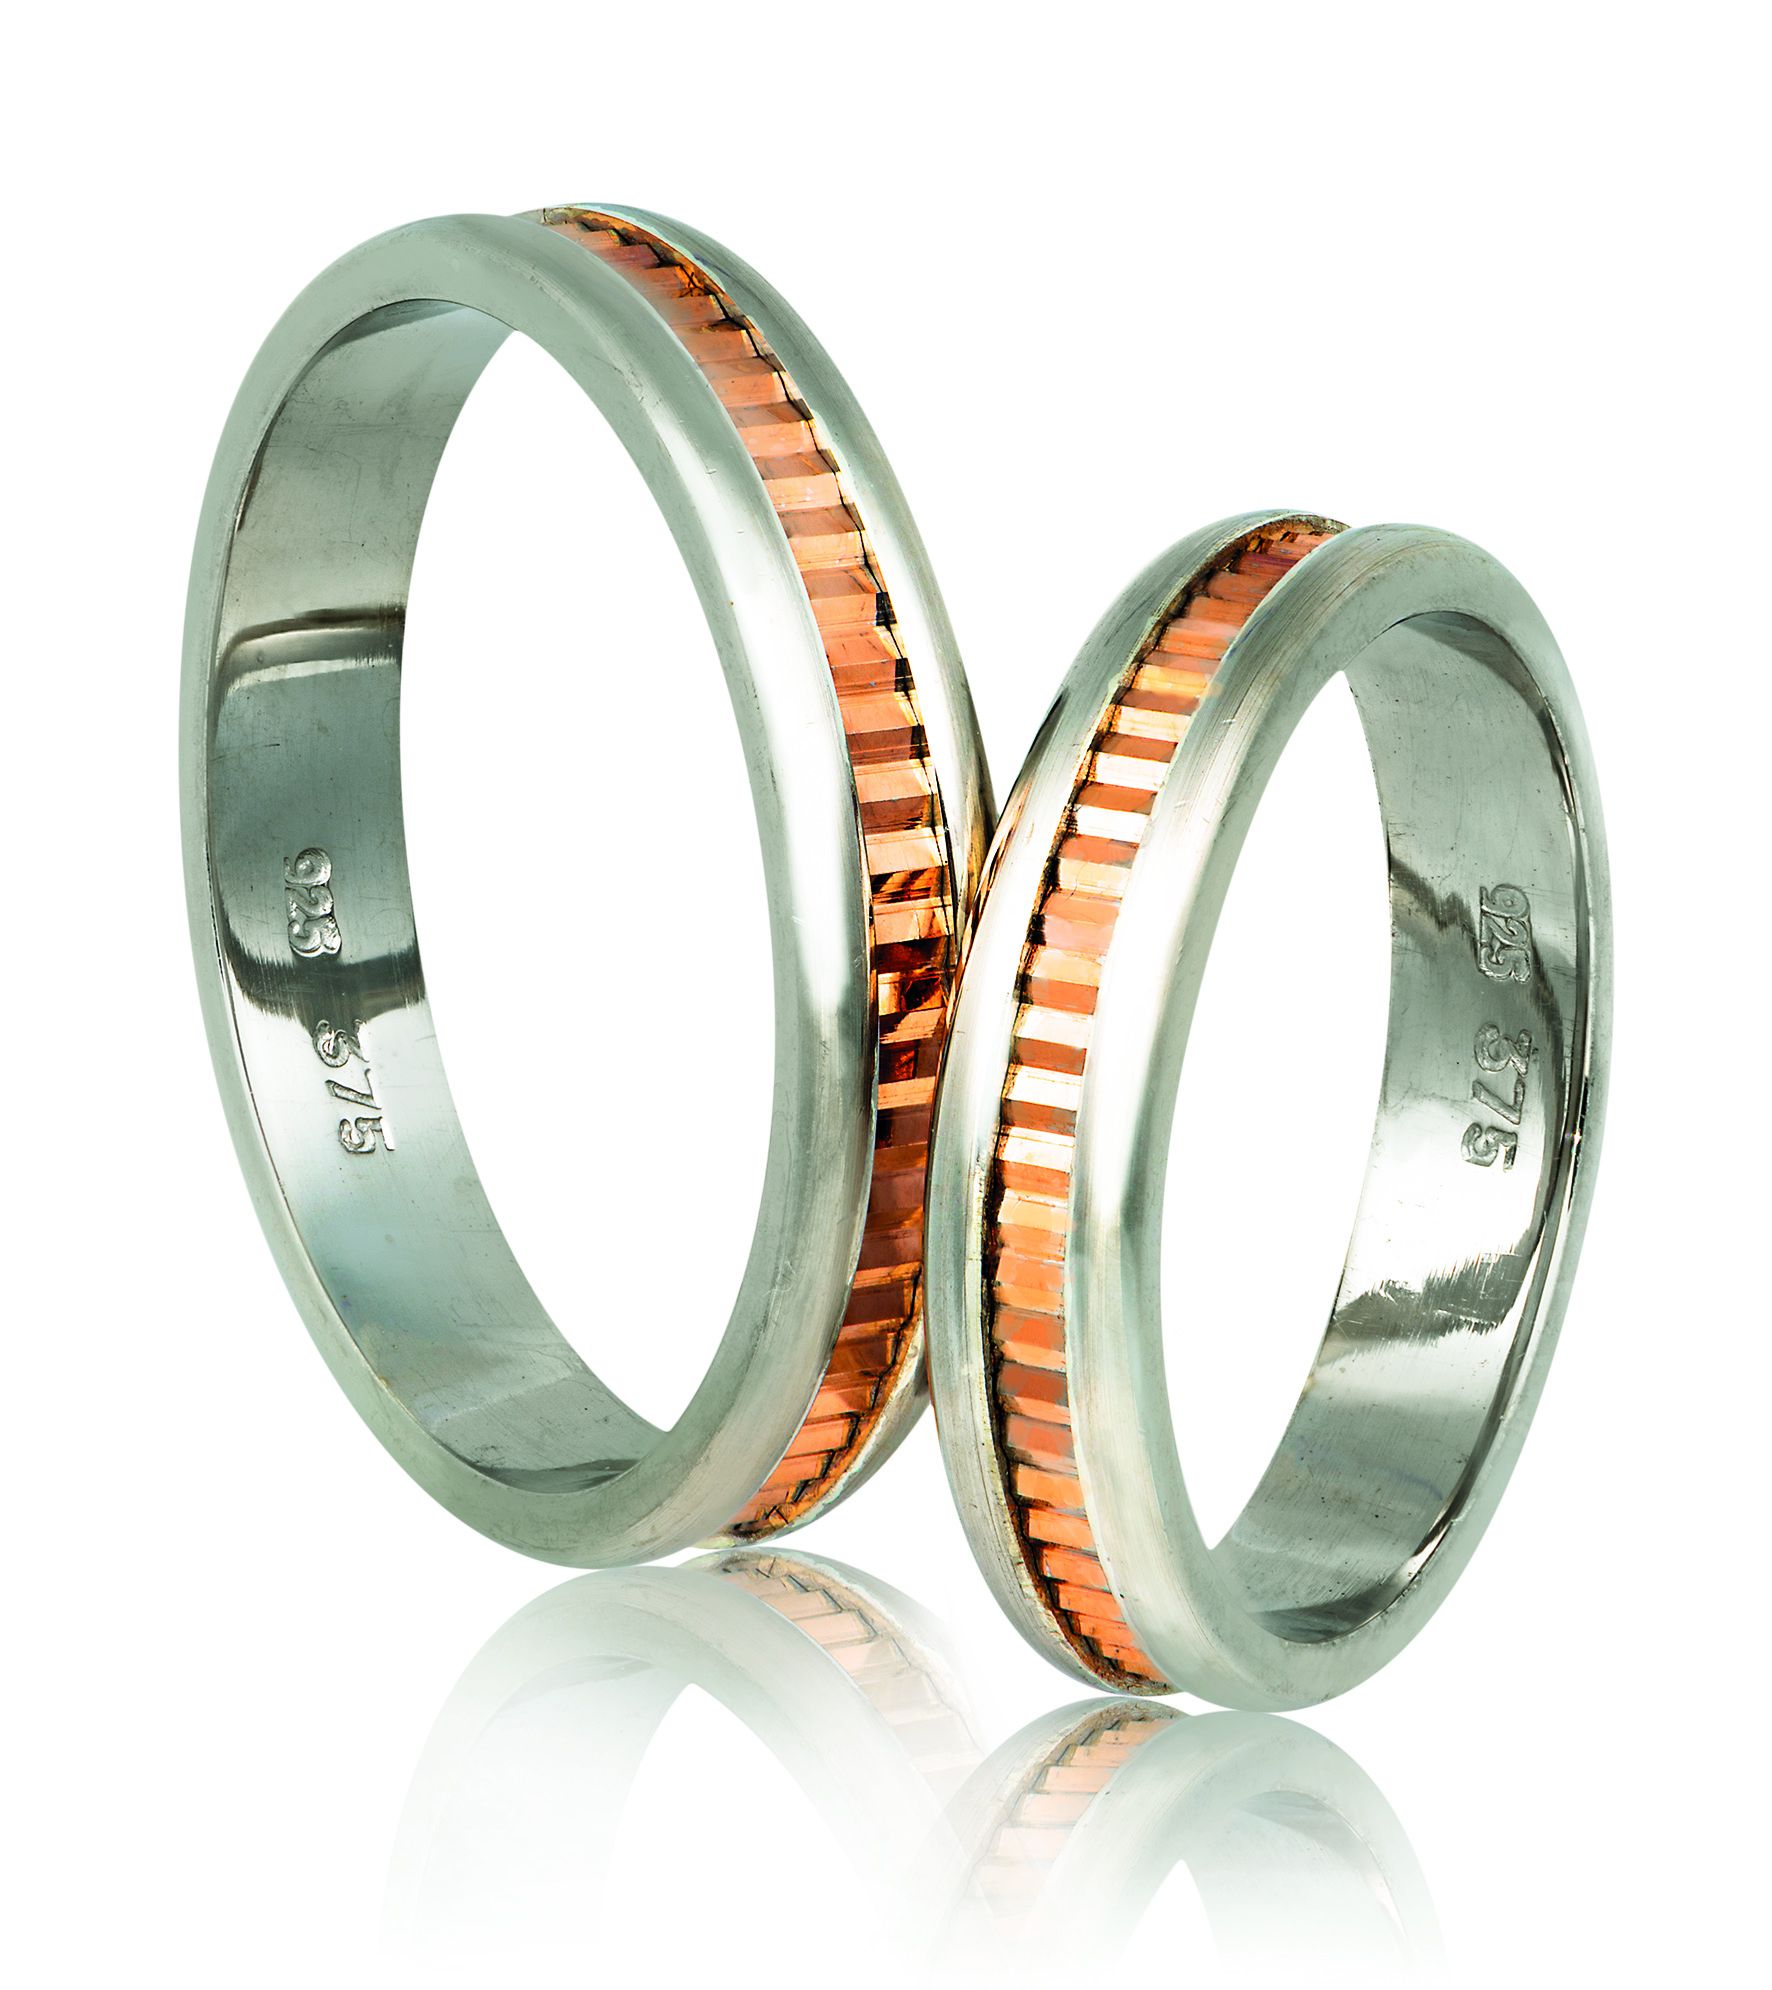 White gold & rose gold wedding rings 4.3mm (code A341r)